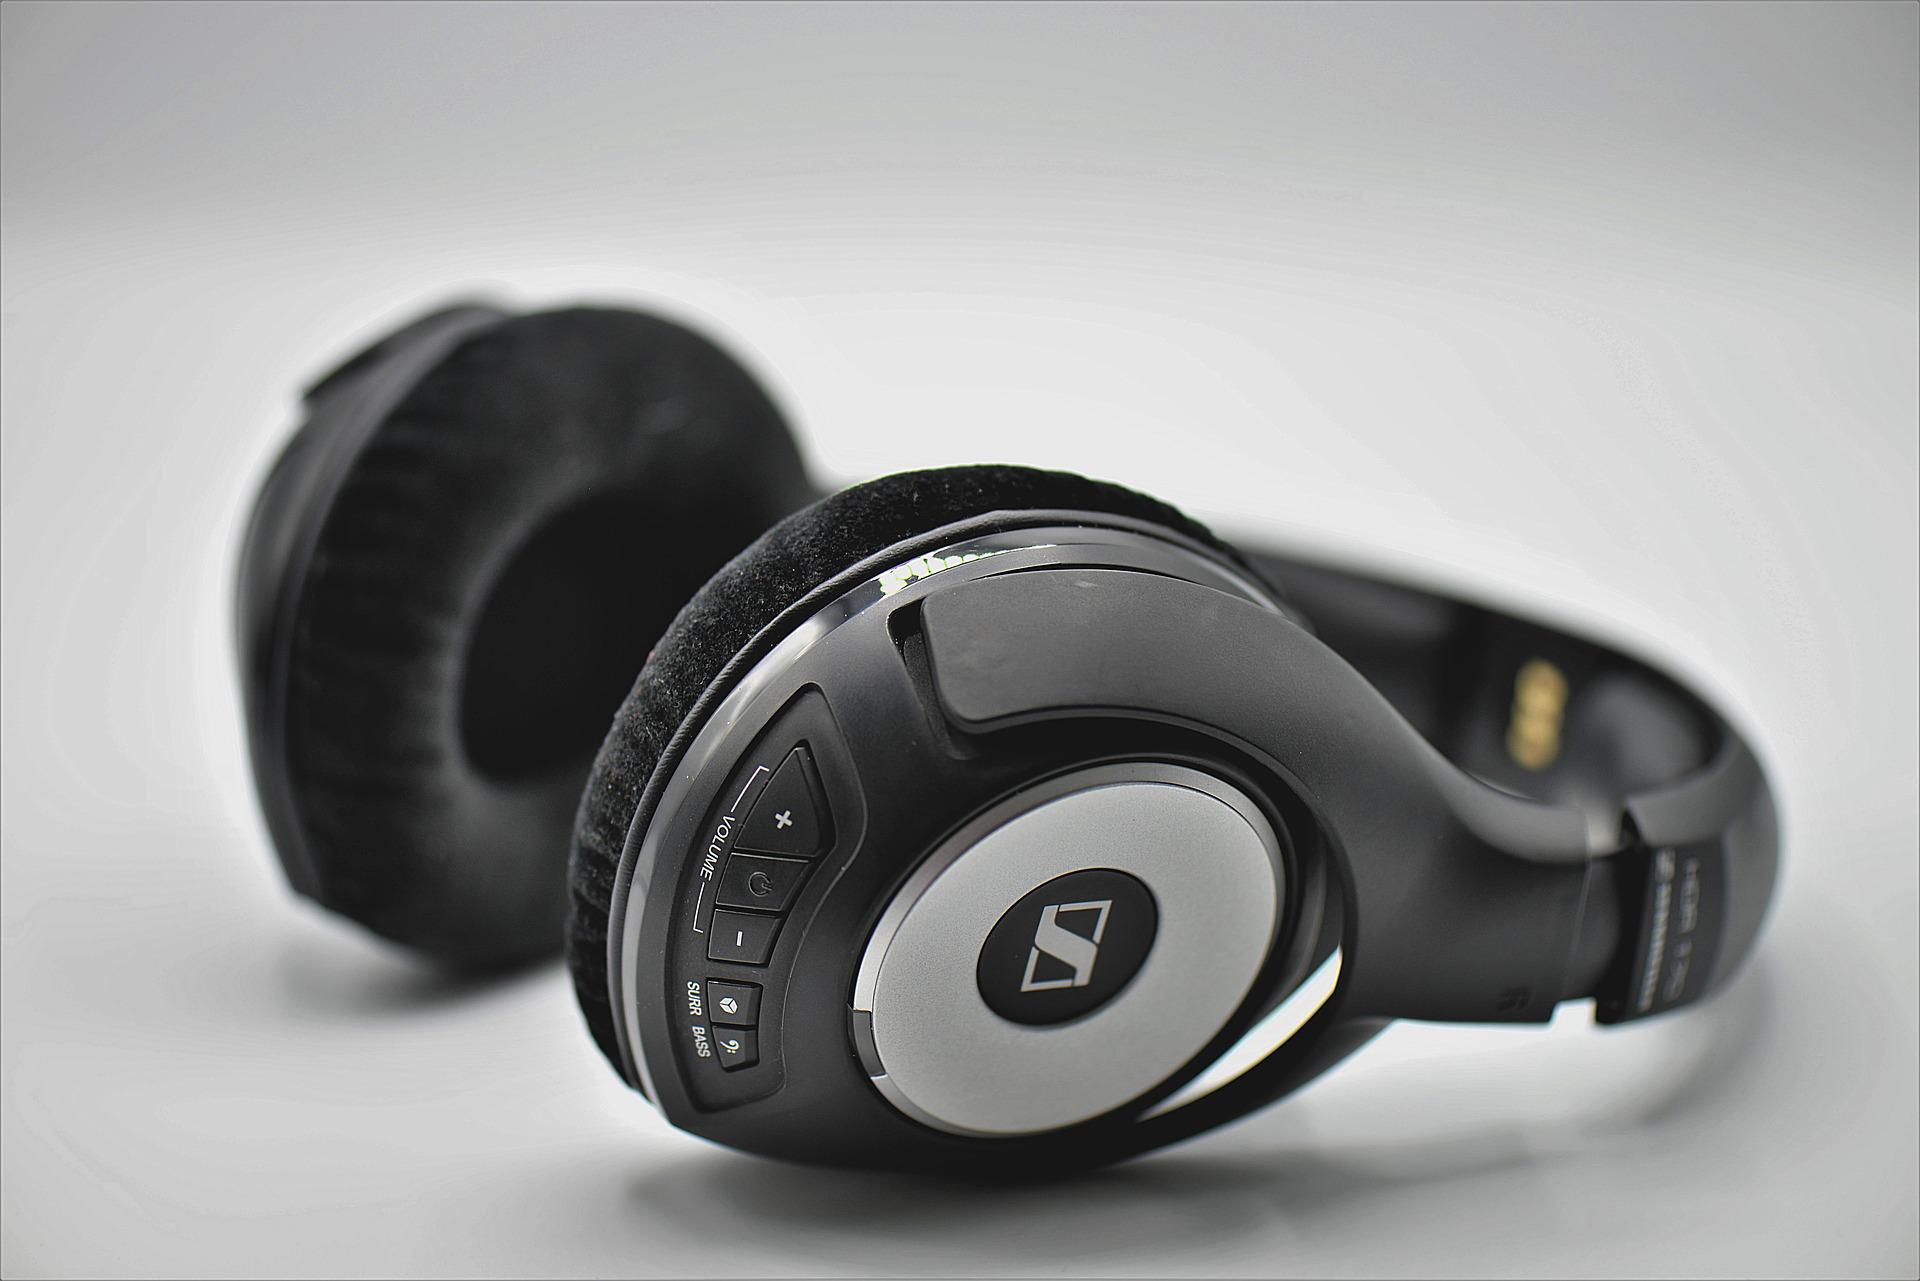 The best gaming headsets that fit your budget and gaming style.